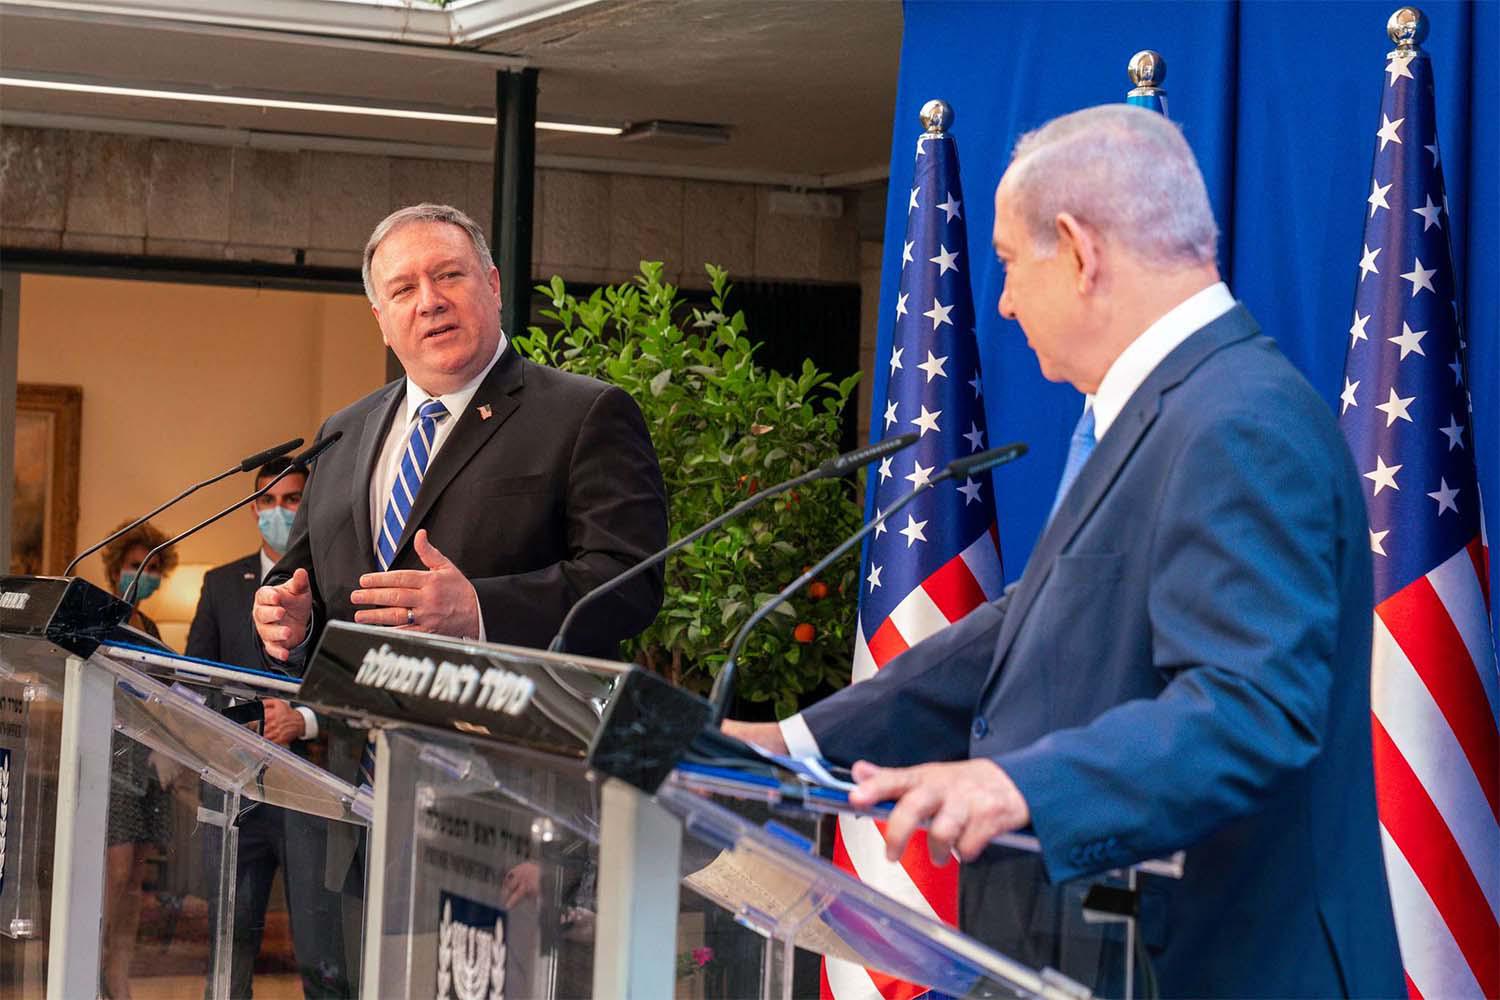 US Secretary of State Mike Pompeo (L) and Israeli Prime Minister Benjamin Netanyahu hold a joint press conference after their meeting